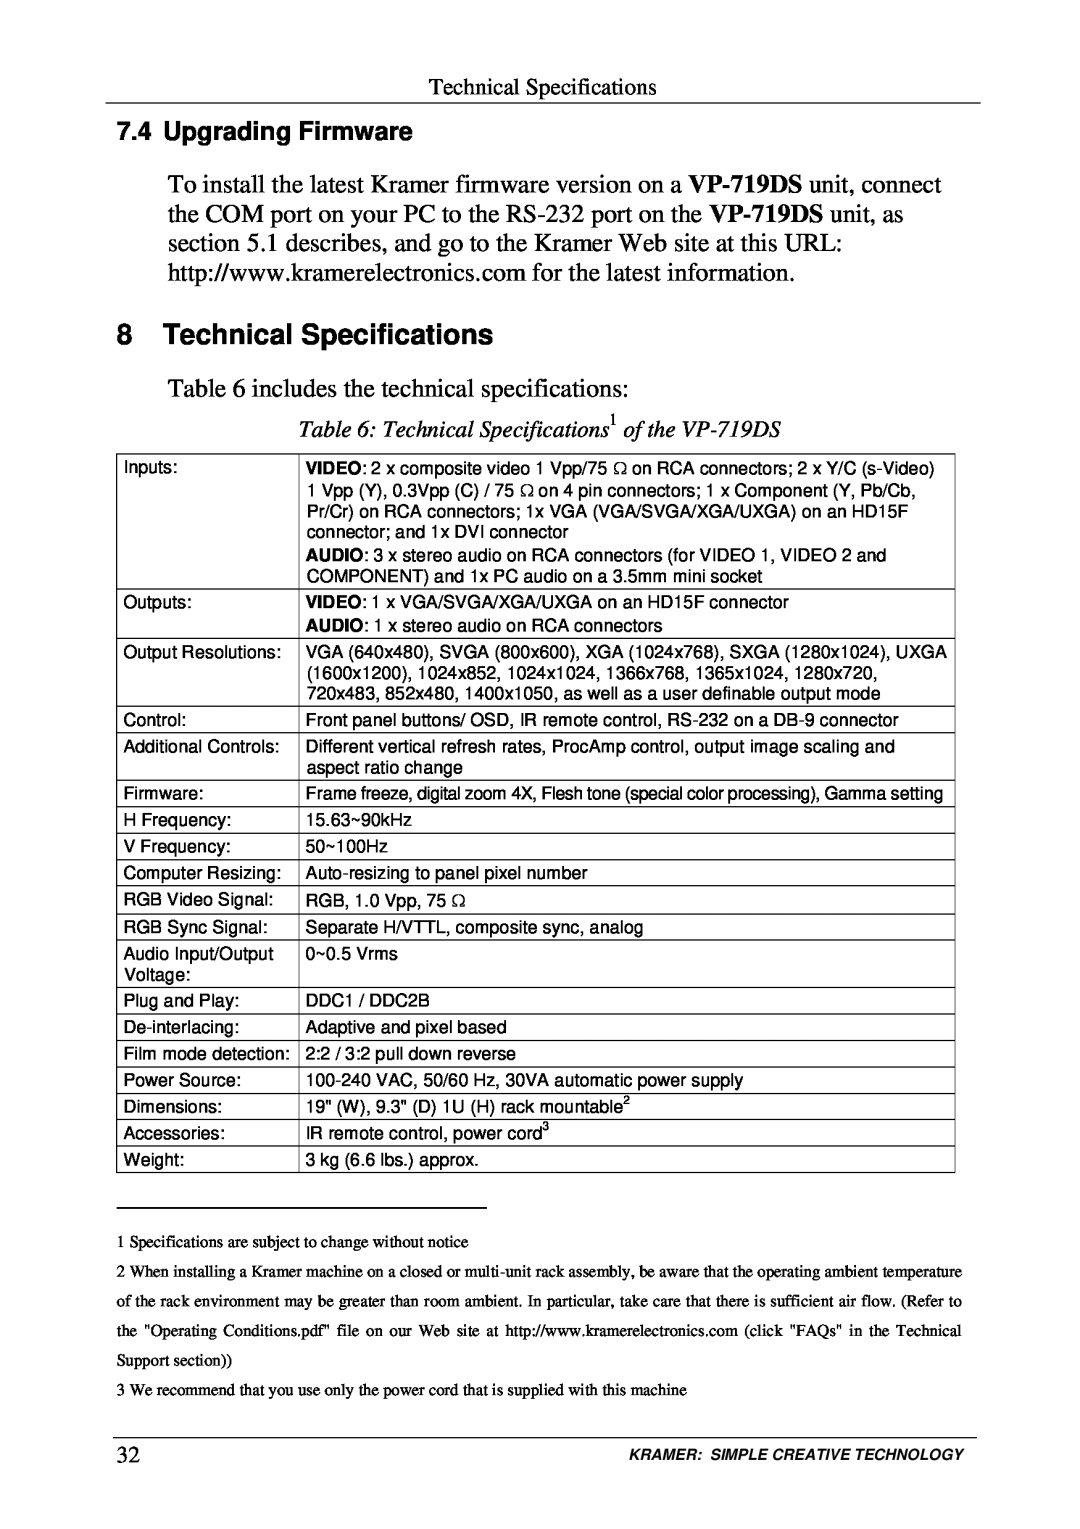 Kramer Electronics VP-719DS user manual Technical Specifications, Upgrading Firmware 